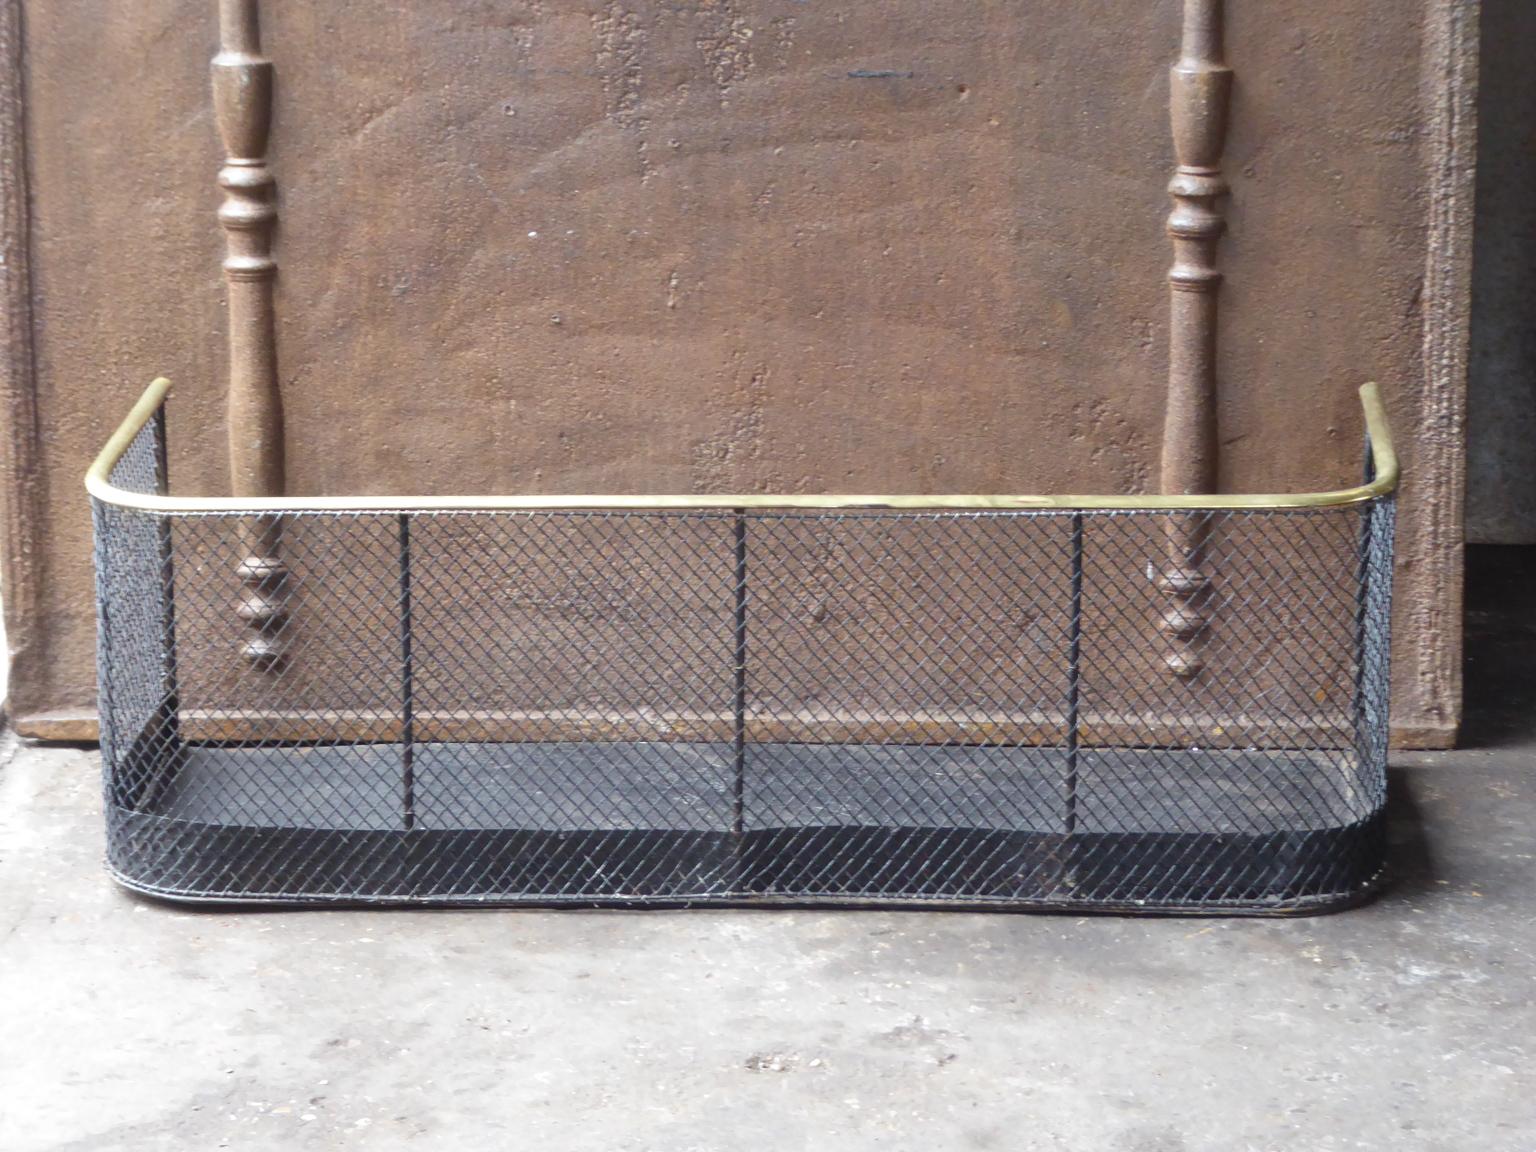 19th century English Victorian fireguard - fireplace guard made of brass, iron and iron mesh. The fire guard is in a good condition and is fully functional.







   